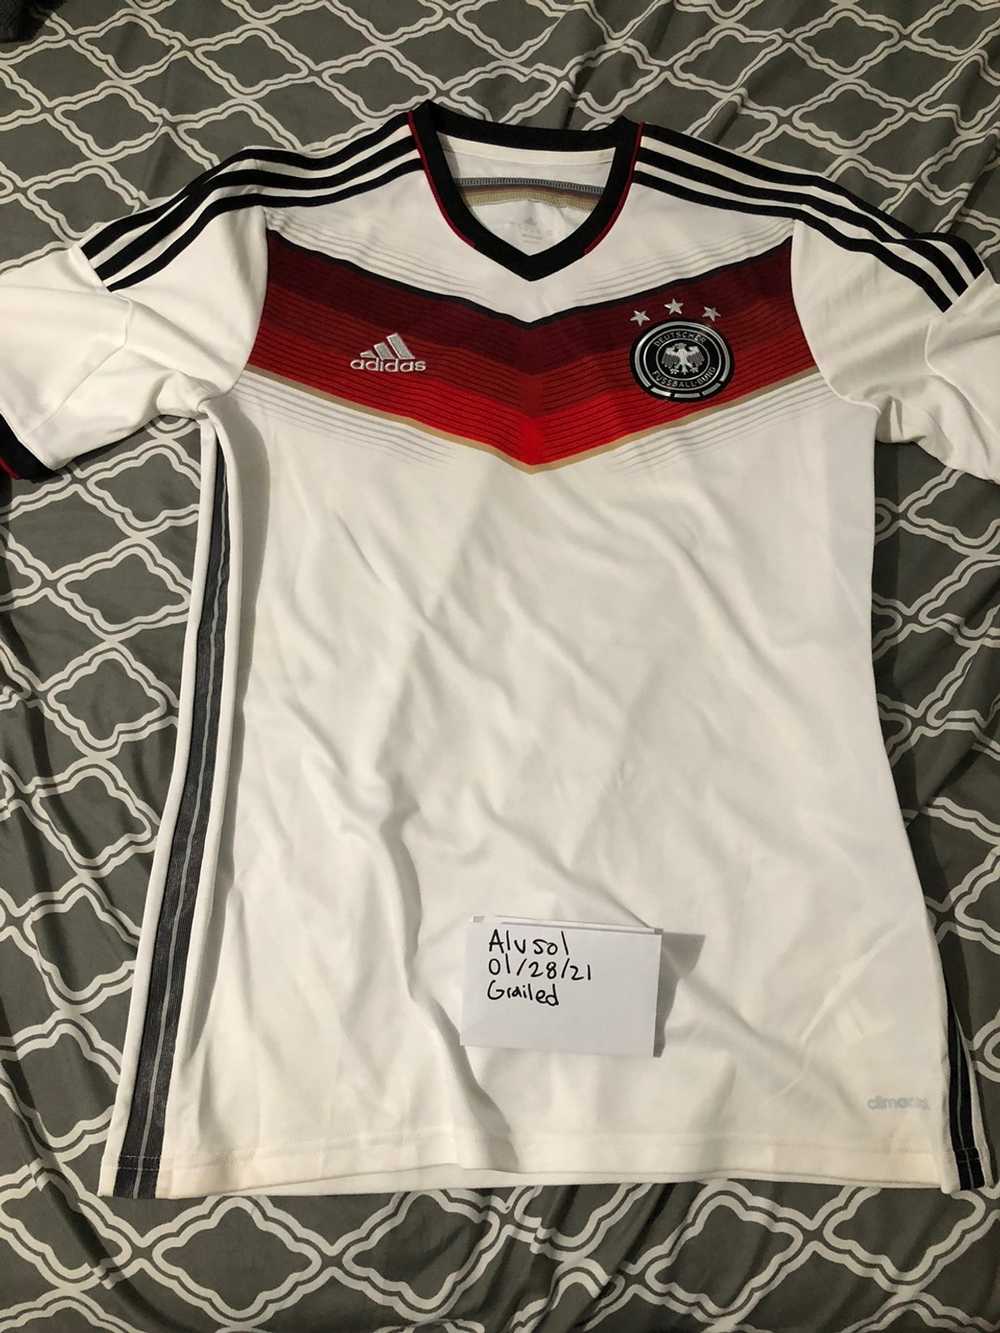 Adidas × Soccer Jersey Germany Adidas Soccer Jers… - image 1